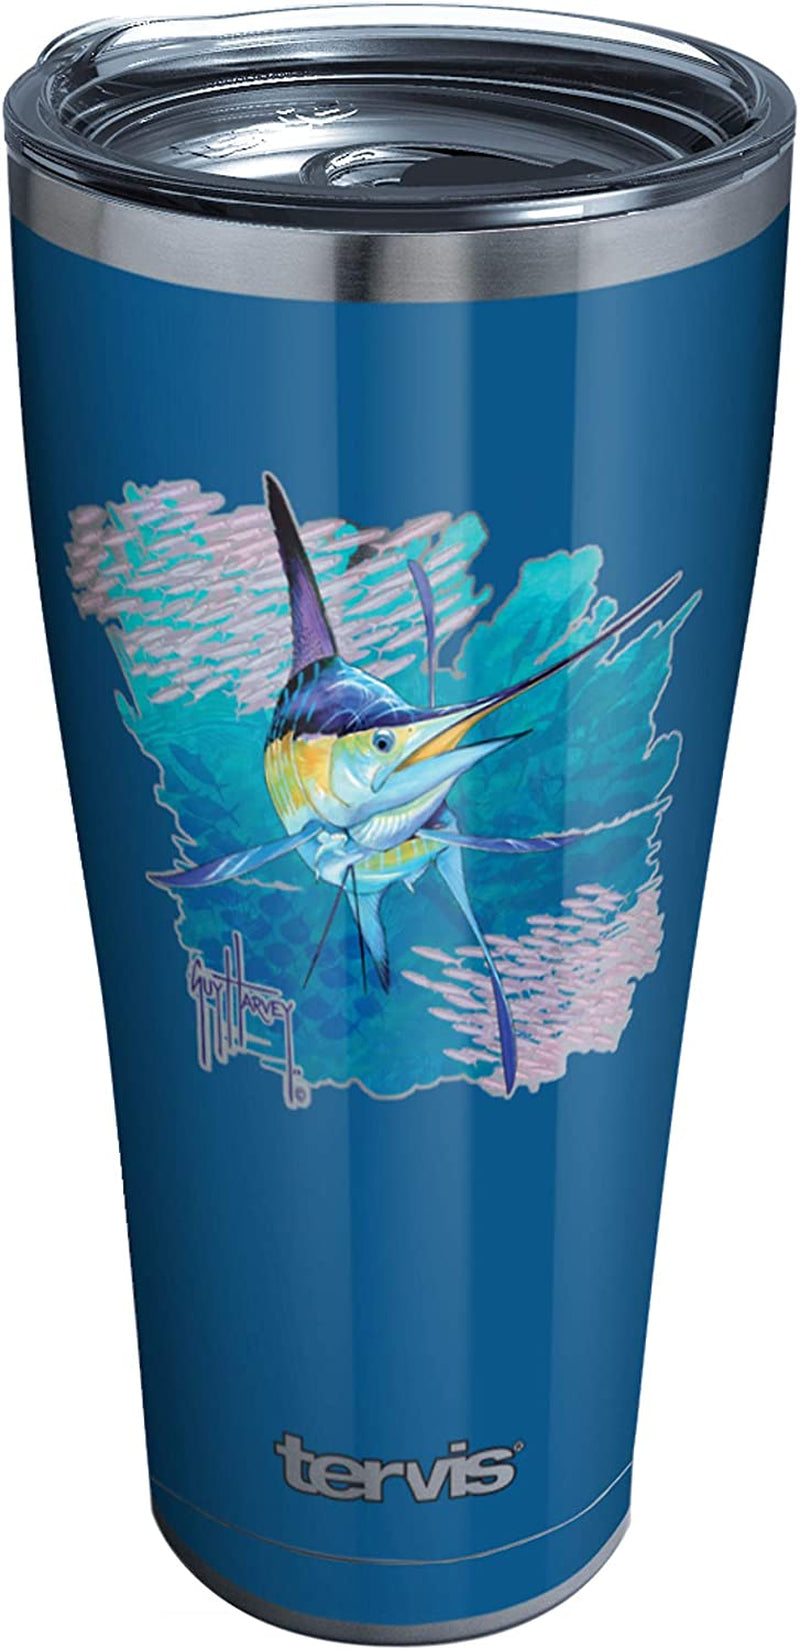 Tervis Made in USA Double Walled Guy Harvey - Offshore Haul Marlin Insulated Tumbler Cup Keeps Drinks Cold & Hot, 16Oz Mug, Classic Home & Garden > Kitchen & Dining > Tableware > Drinkware Tervis Stainless Steel 30oz 